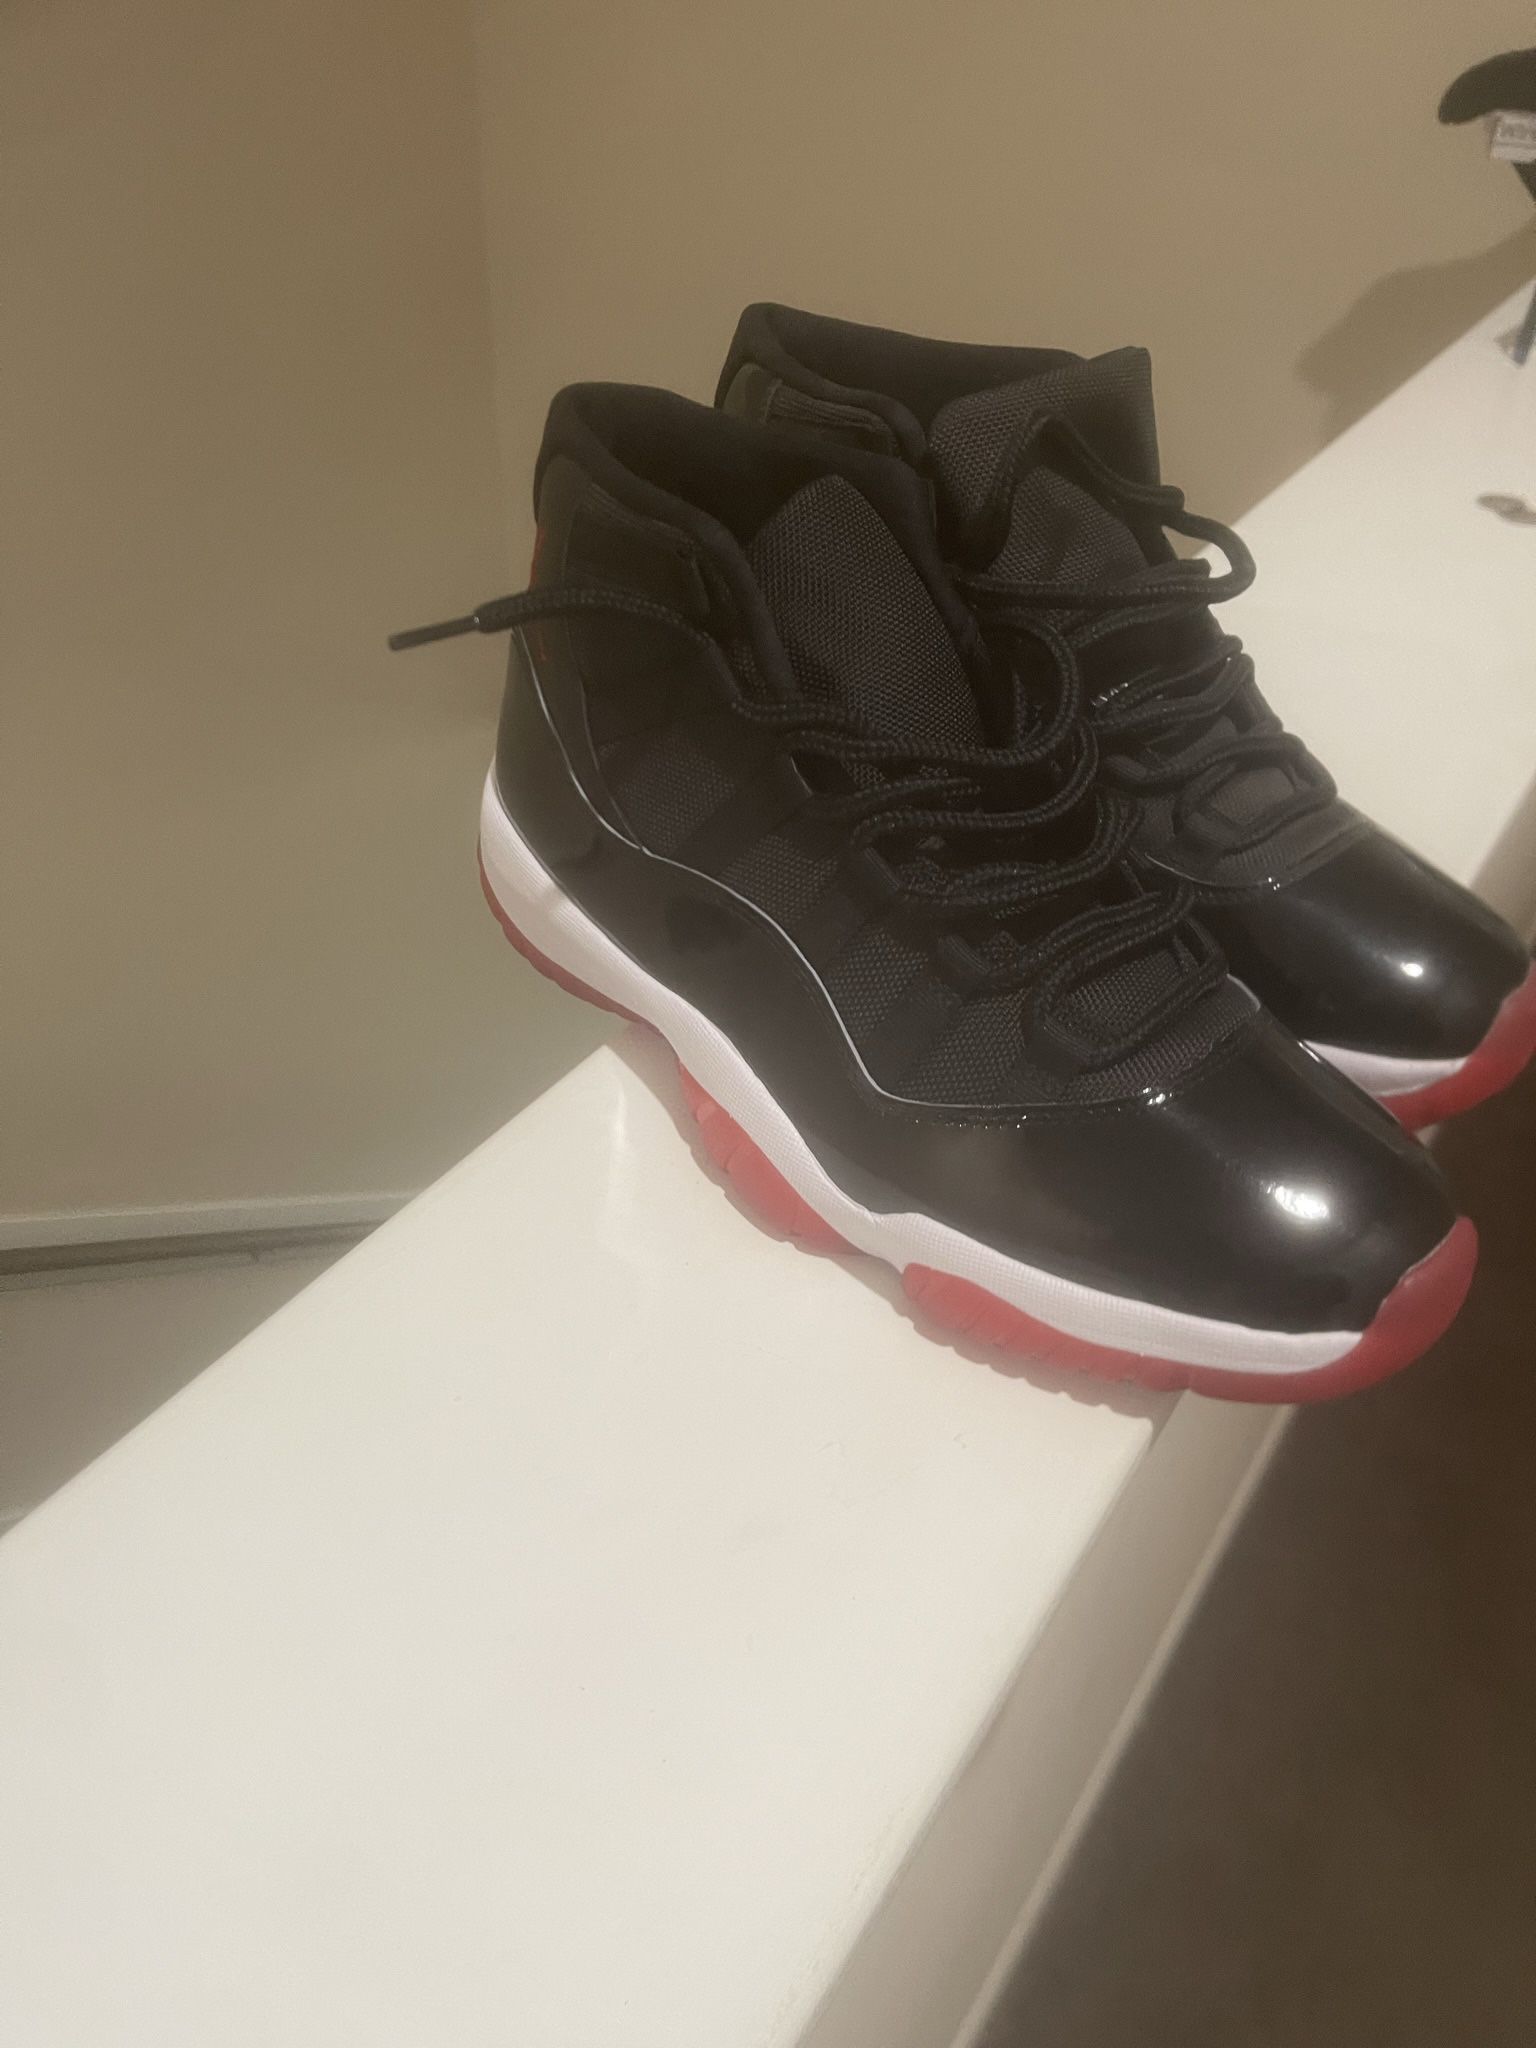 Never Worn Size 11.5 Bred 11s